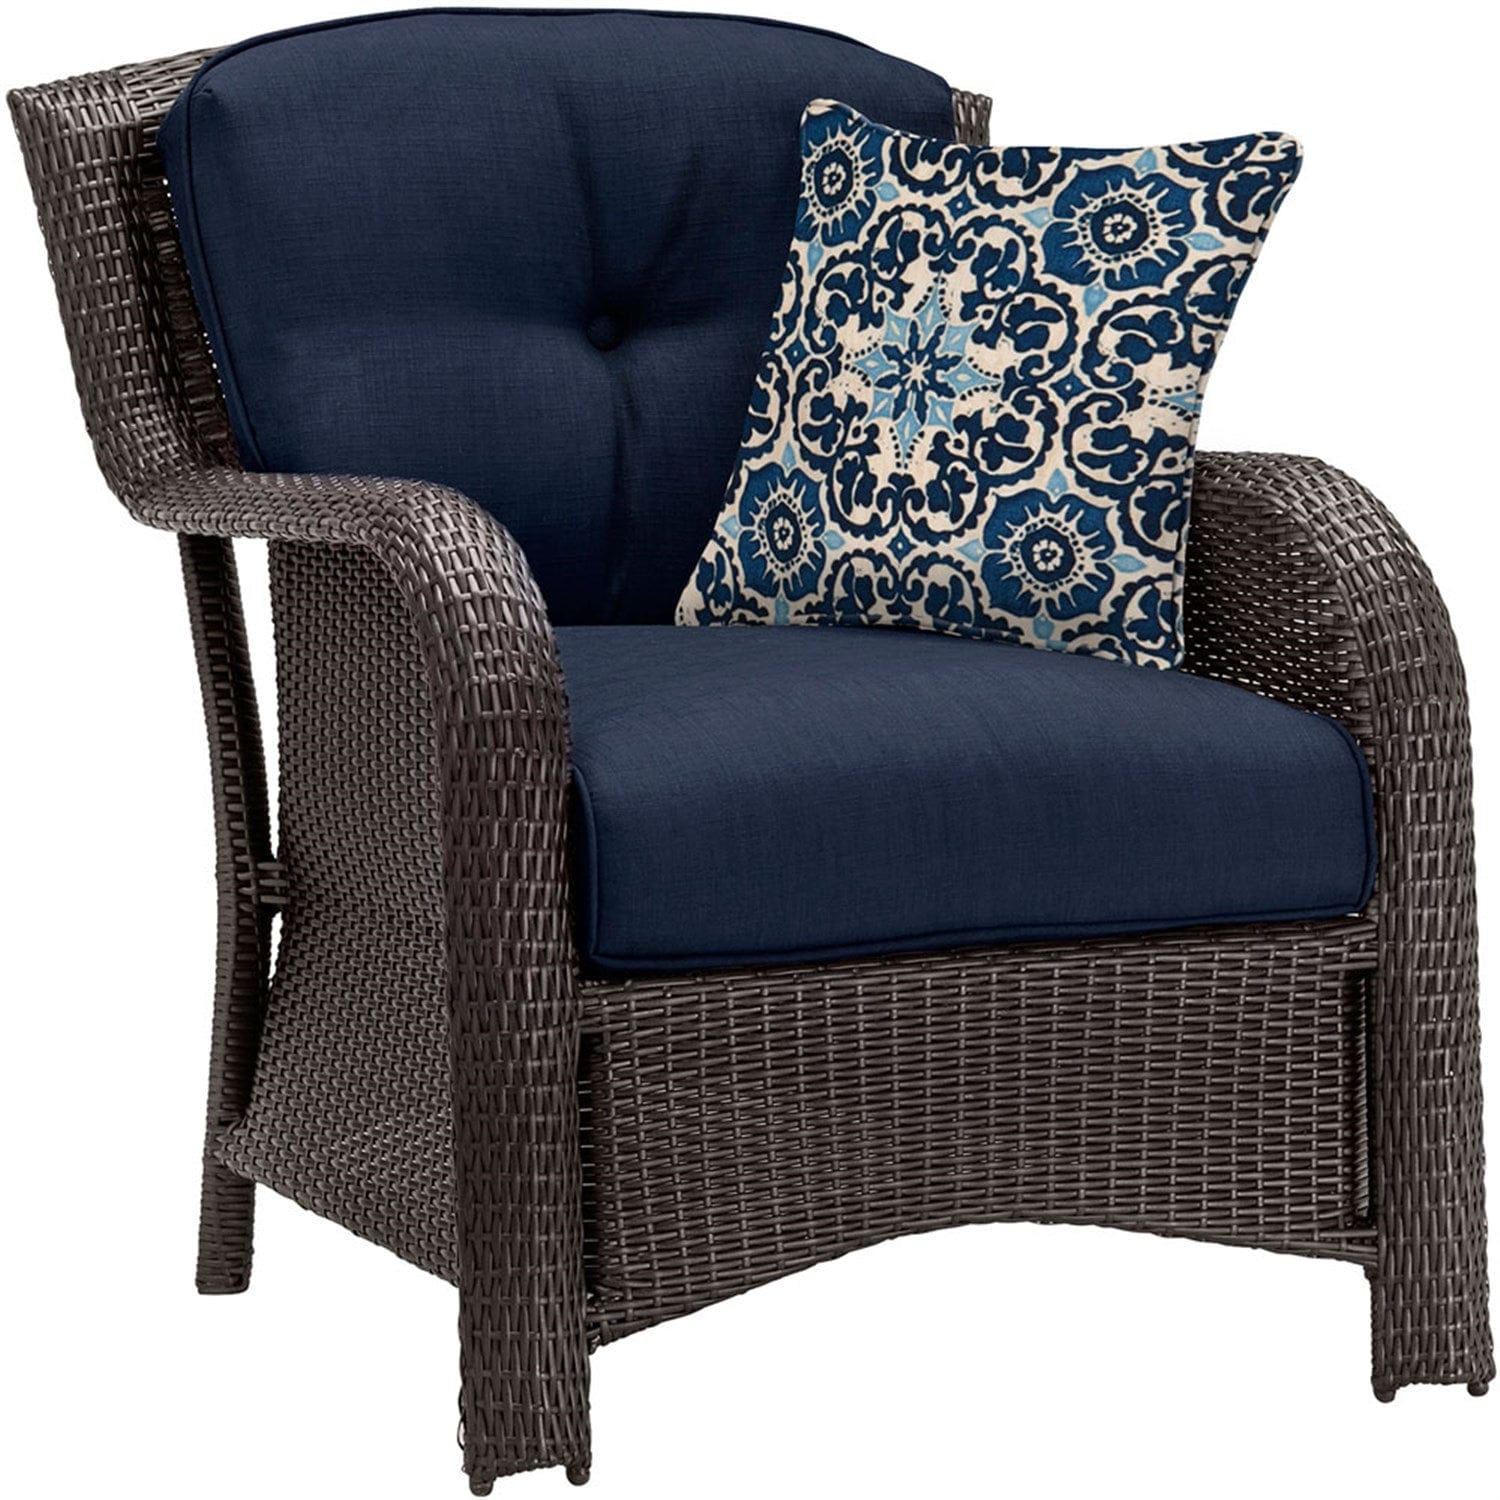 Hanover Conversation Set Hanover - Strathmere 6-Piece Lounge Set in Navy Blue with Fire Pit Table